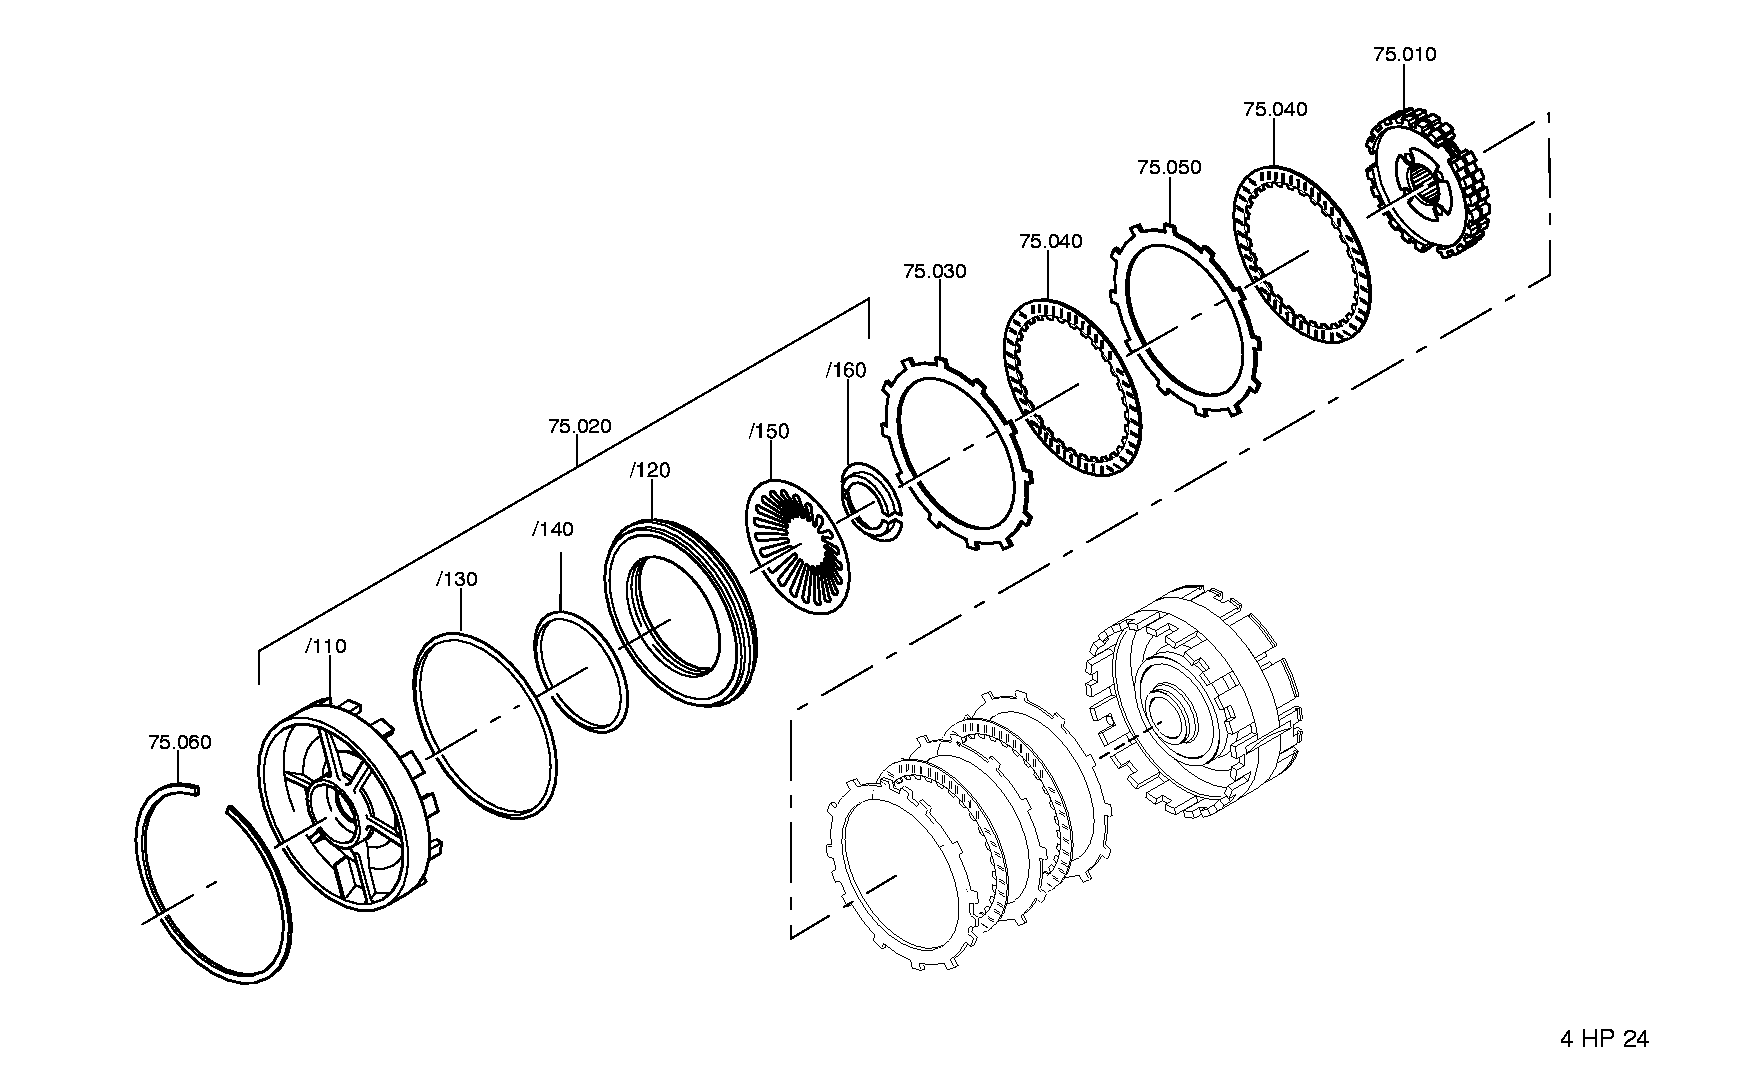 drawing for UNIPART 02JLM 10820 - ROUND SEALING RING (figure 3)